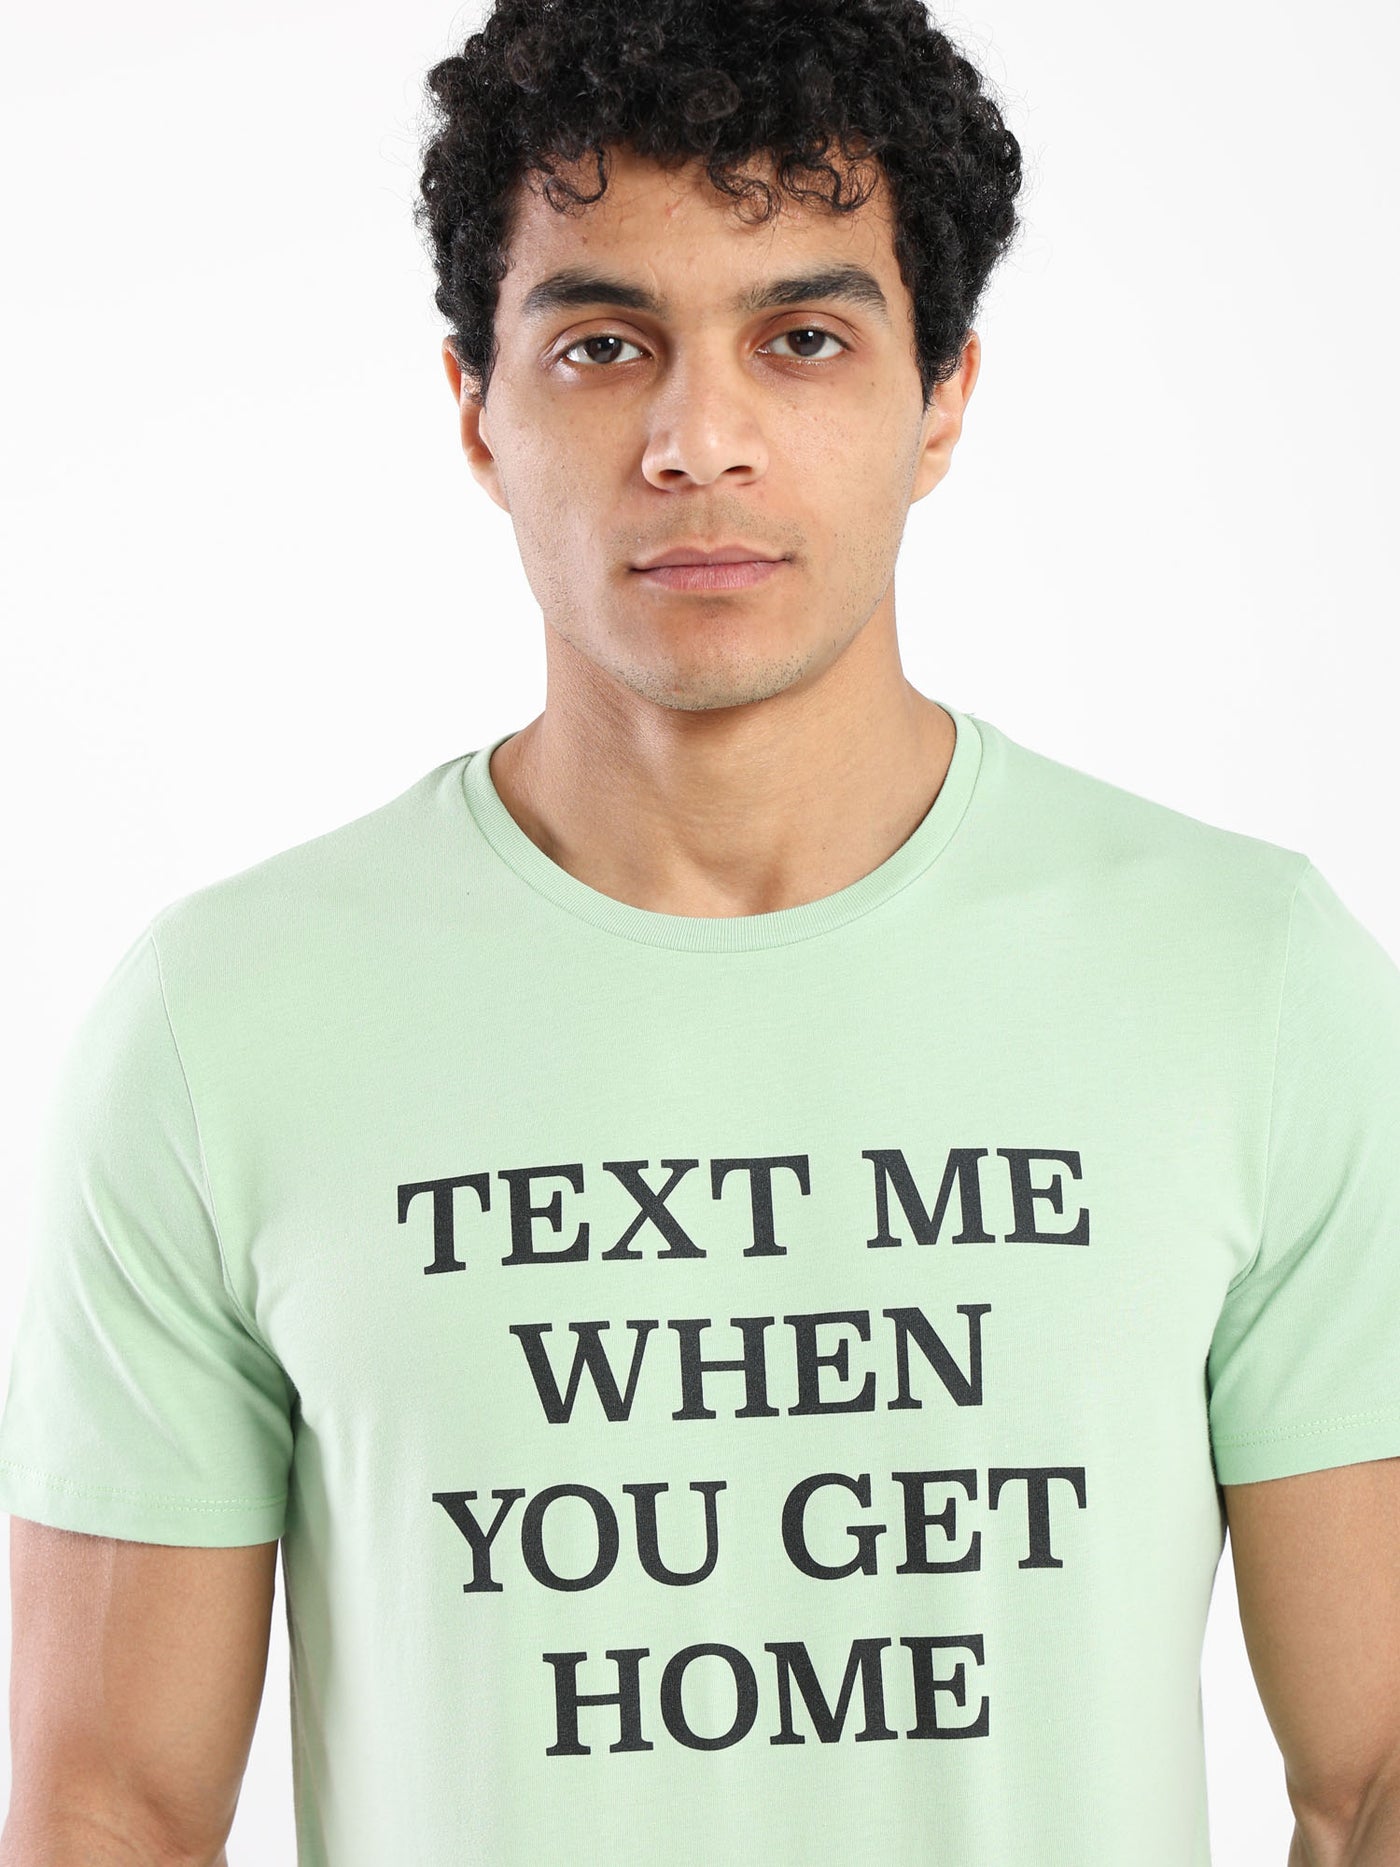 T-Shirt - "Text Me When You Get Home" Front Print